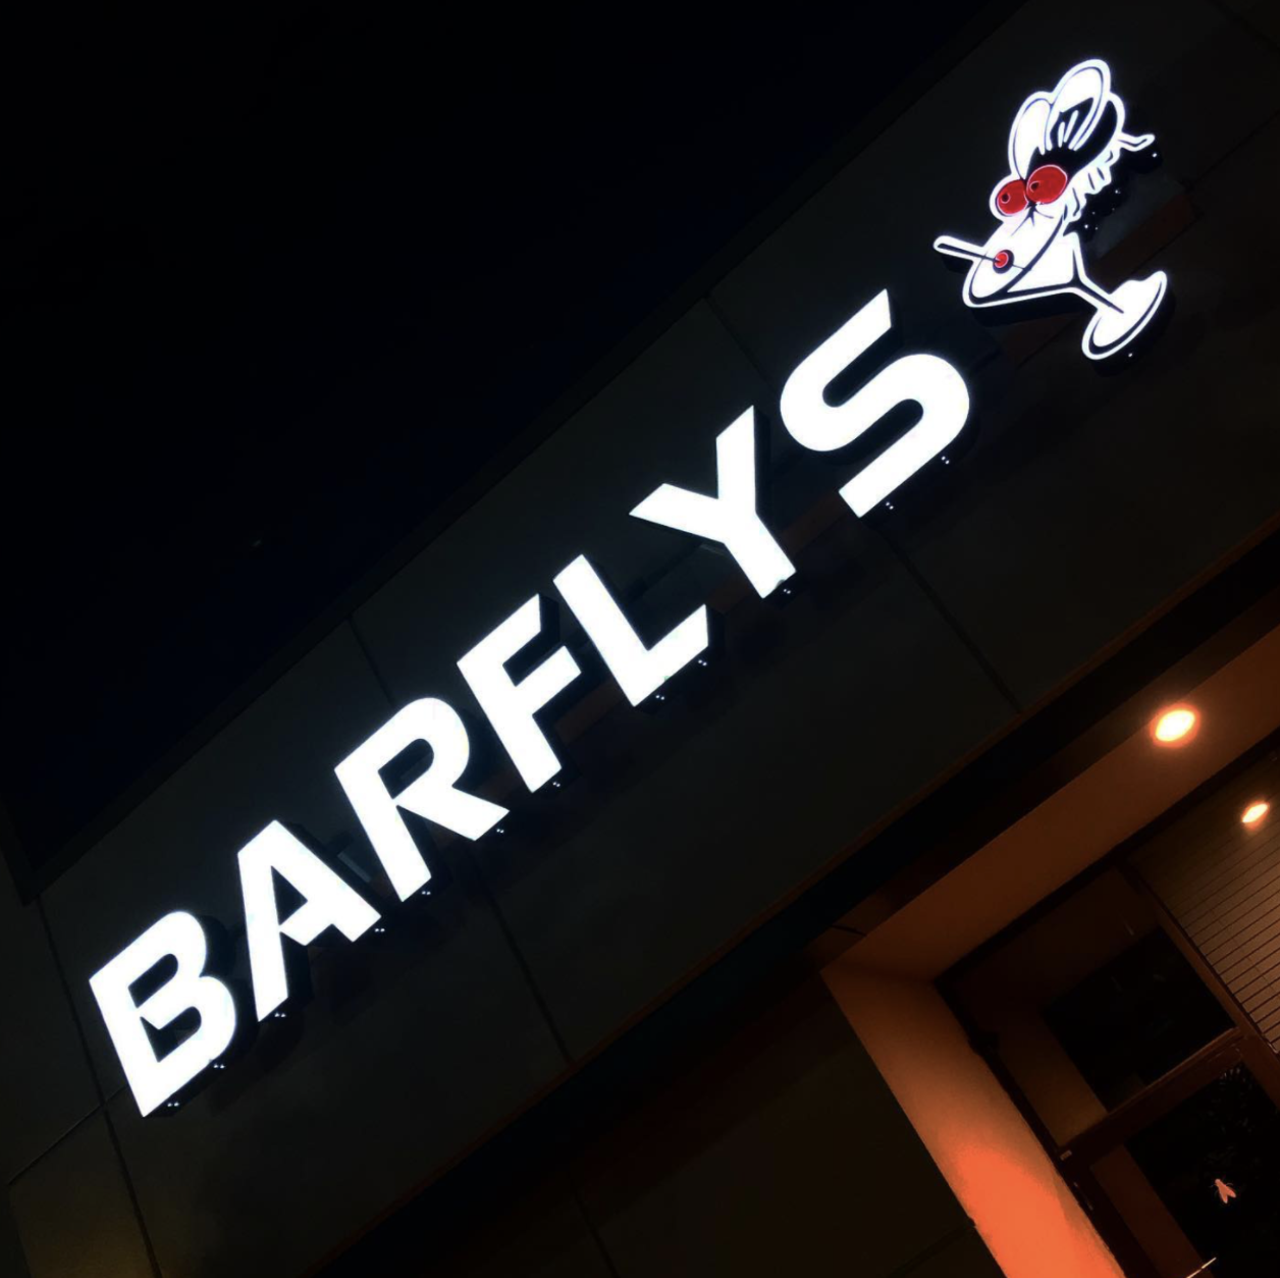 Barflys
8503 Broadway St, (210) 277-7202, facebook.com/BARFLYS1/
If you find your daylong bender is kicking-off near the airport, stop by Barflys for a round or two. Opening at 10 a.m. Monday through Saturday and at noon on Sunday, you can score a beer or cocktail at this divey sports bar. 
Photo via Instagram / barflys.satx